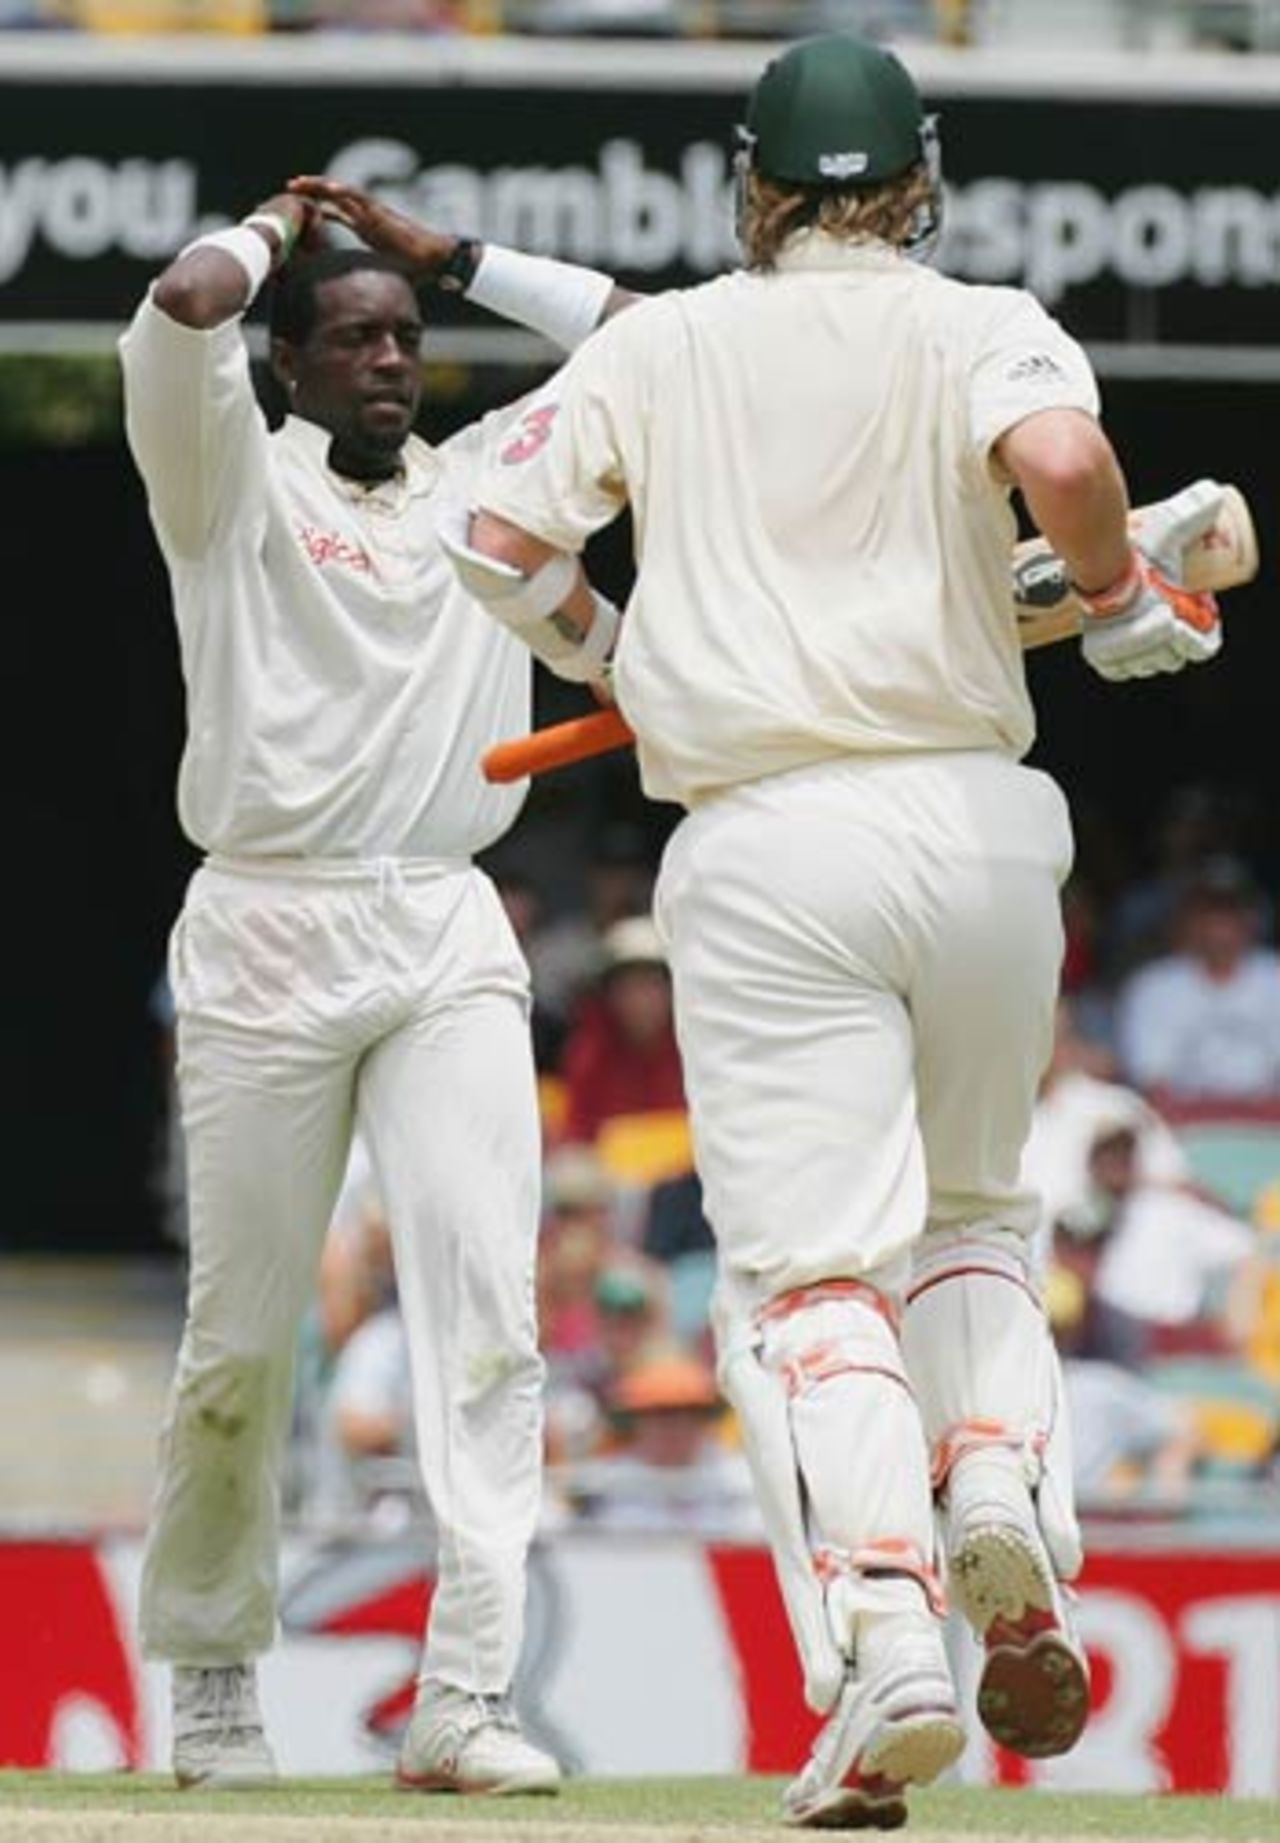 The frustration continues for Jermaine Lawson as Australia pile on the runs, Australia v West Indies, 1st Test, Brisbane, 2nd day, November 4, 2005